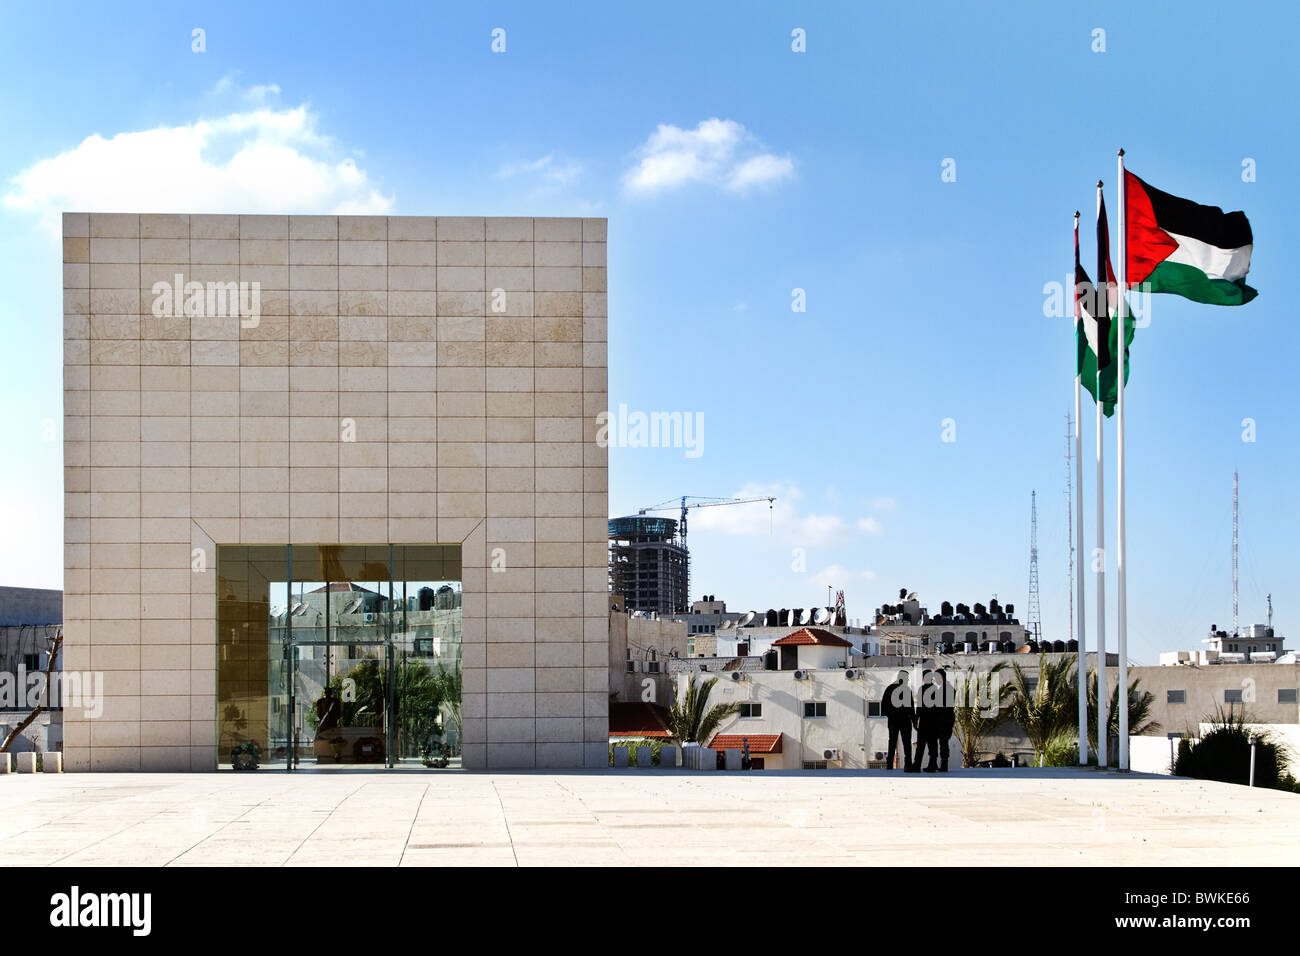 The building sheltering Yasser Arafat's grave near his former headquarter 'Muqata' compound, in Ramallah, West Bank, Palestine. Stock Photo